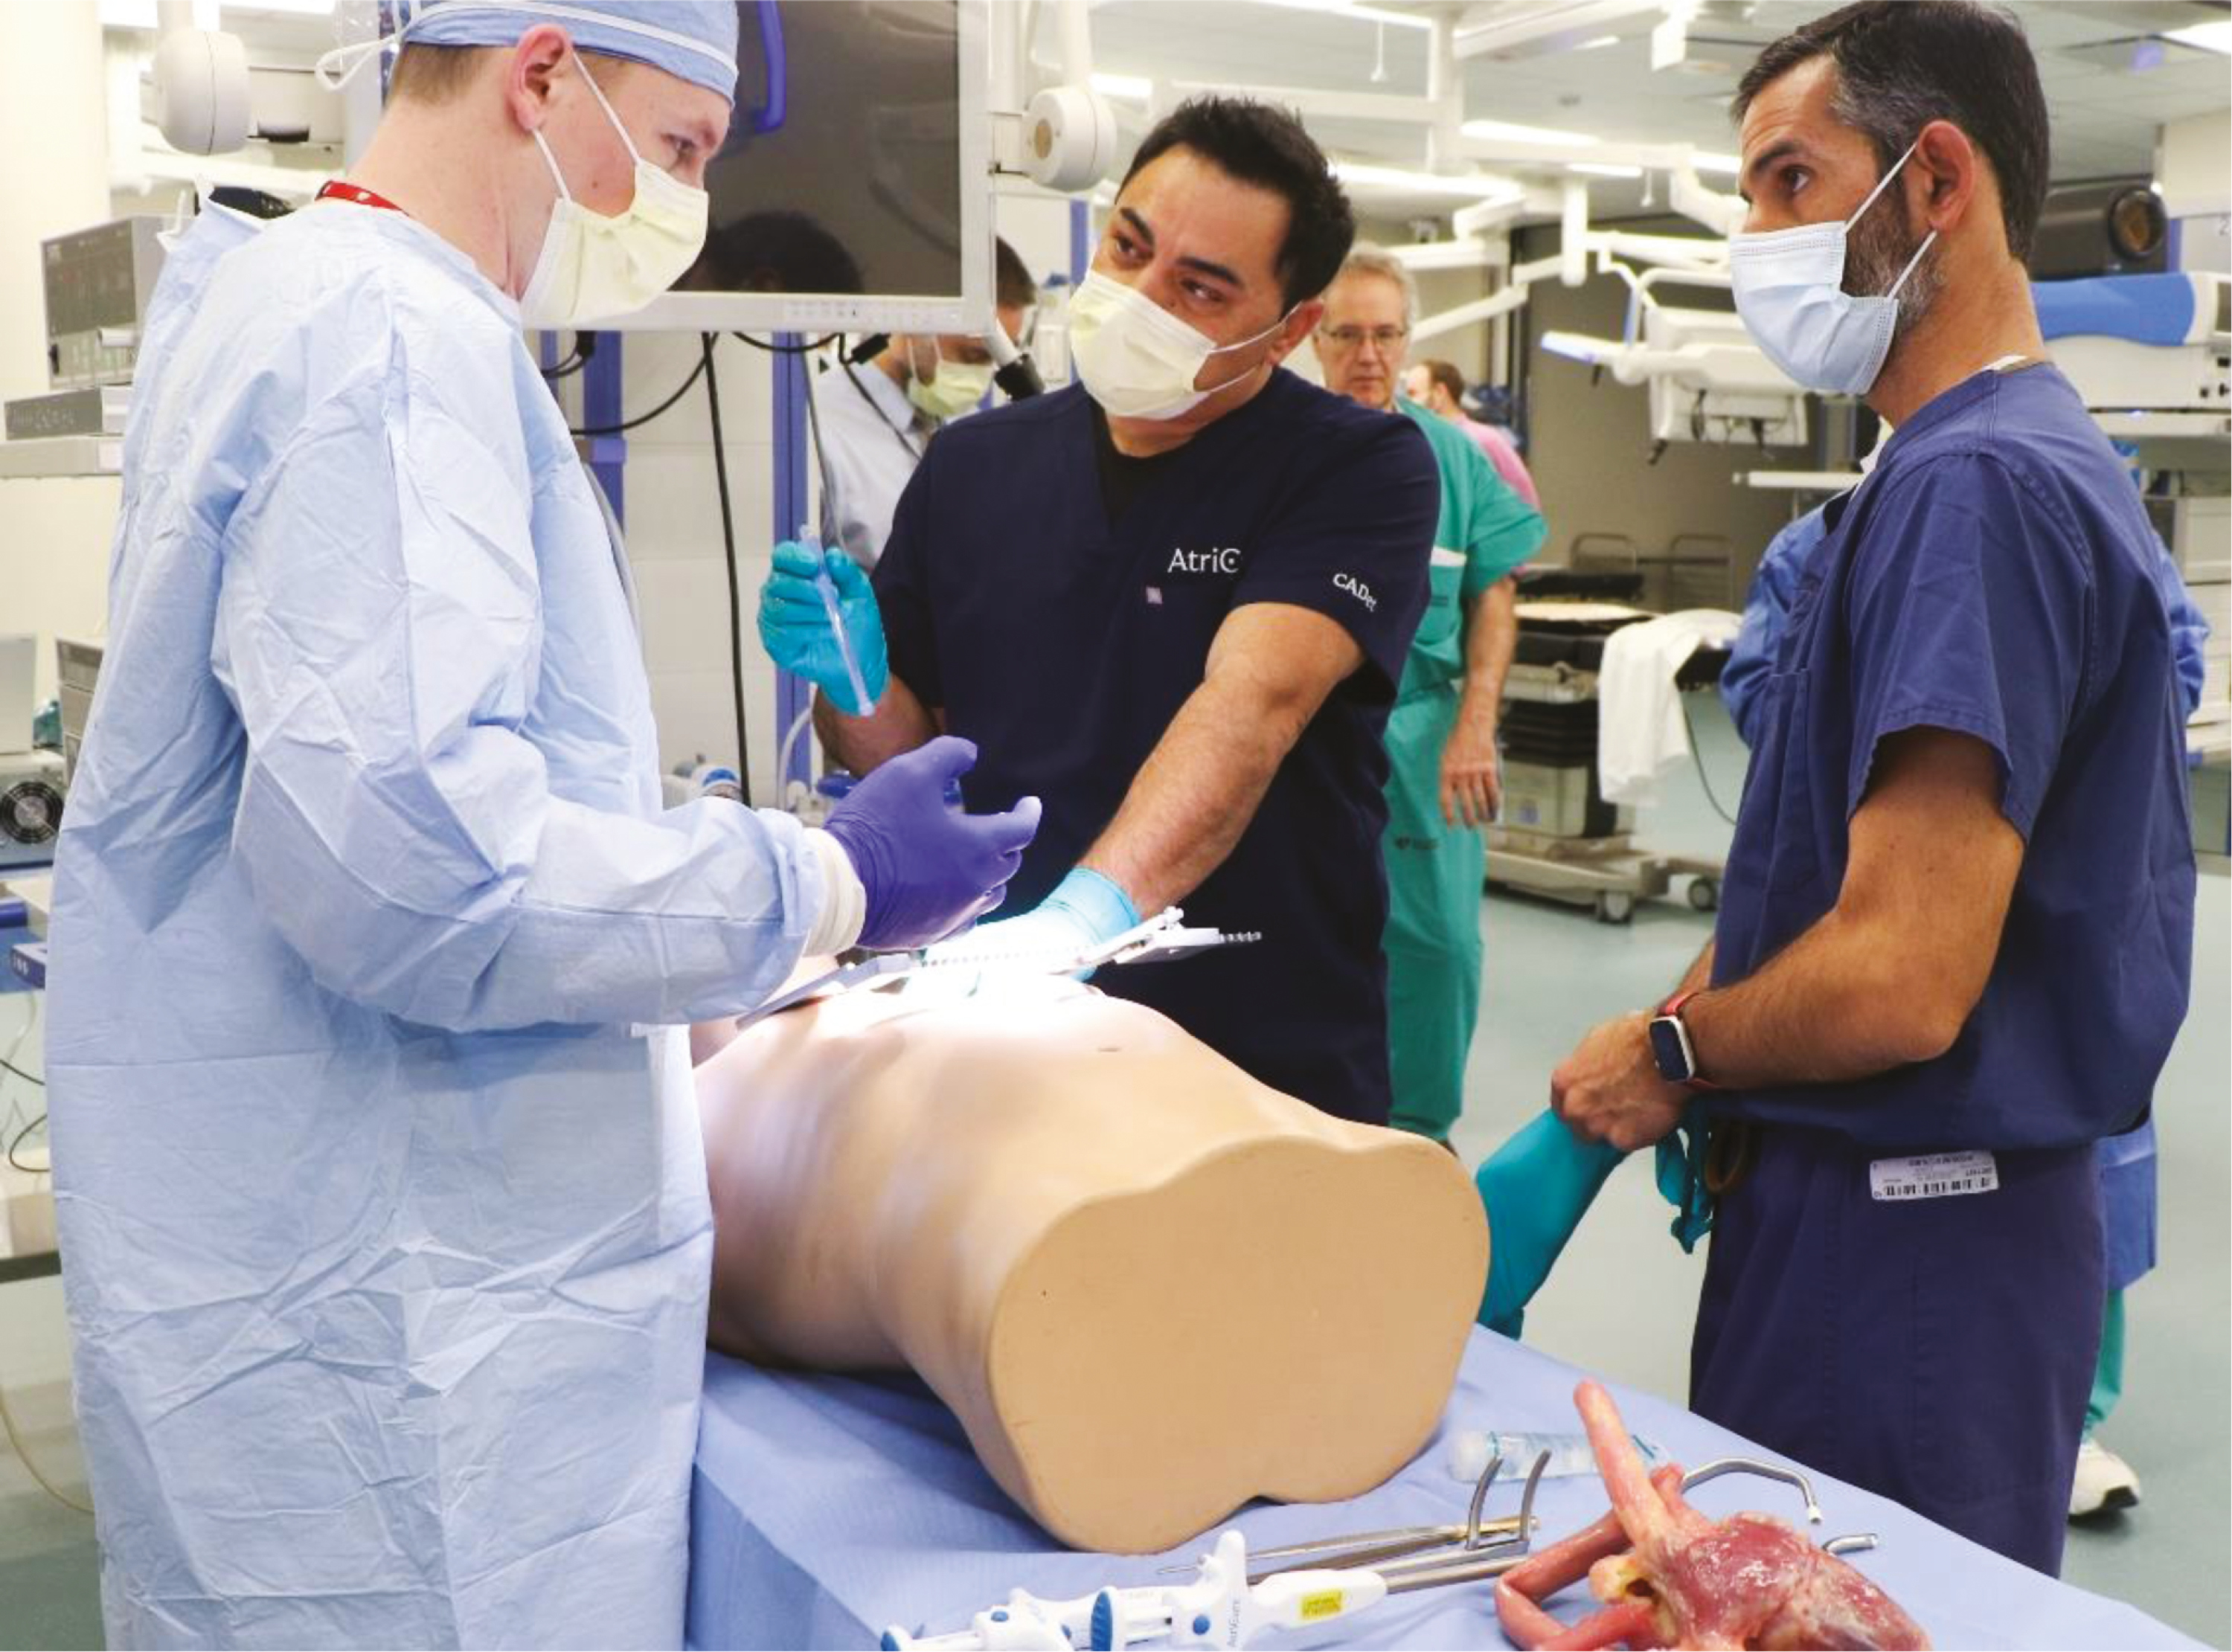 Physicians practicing advanced surgical skills in a simulated operating room